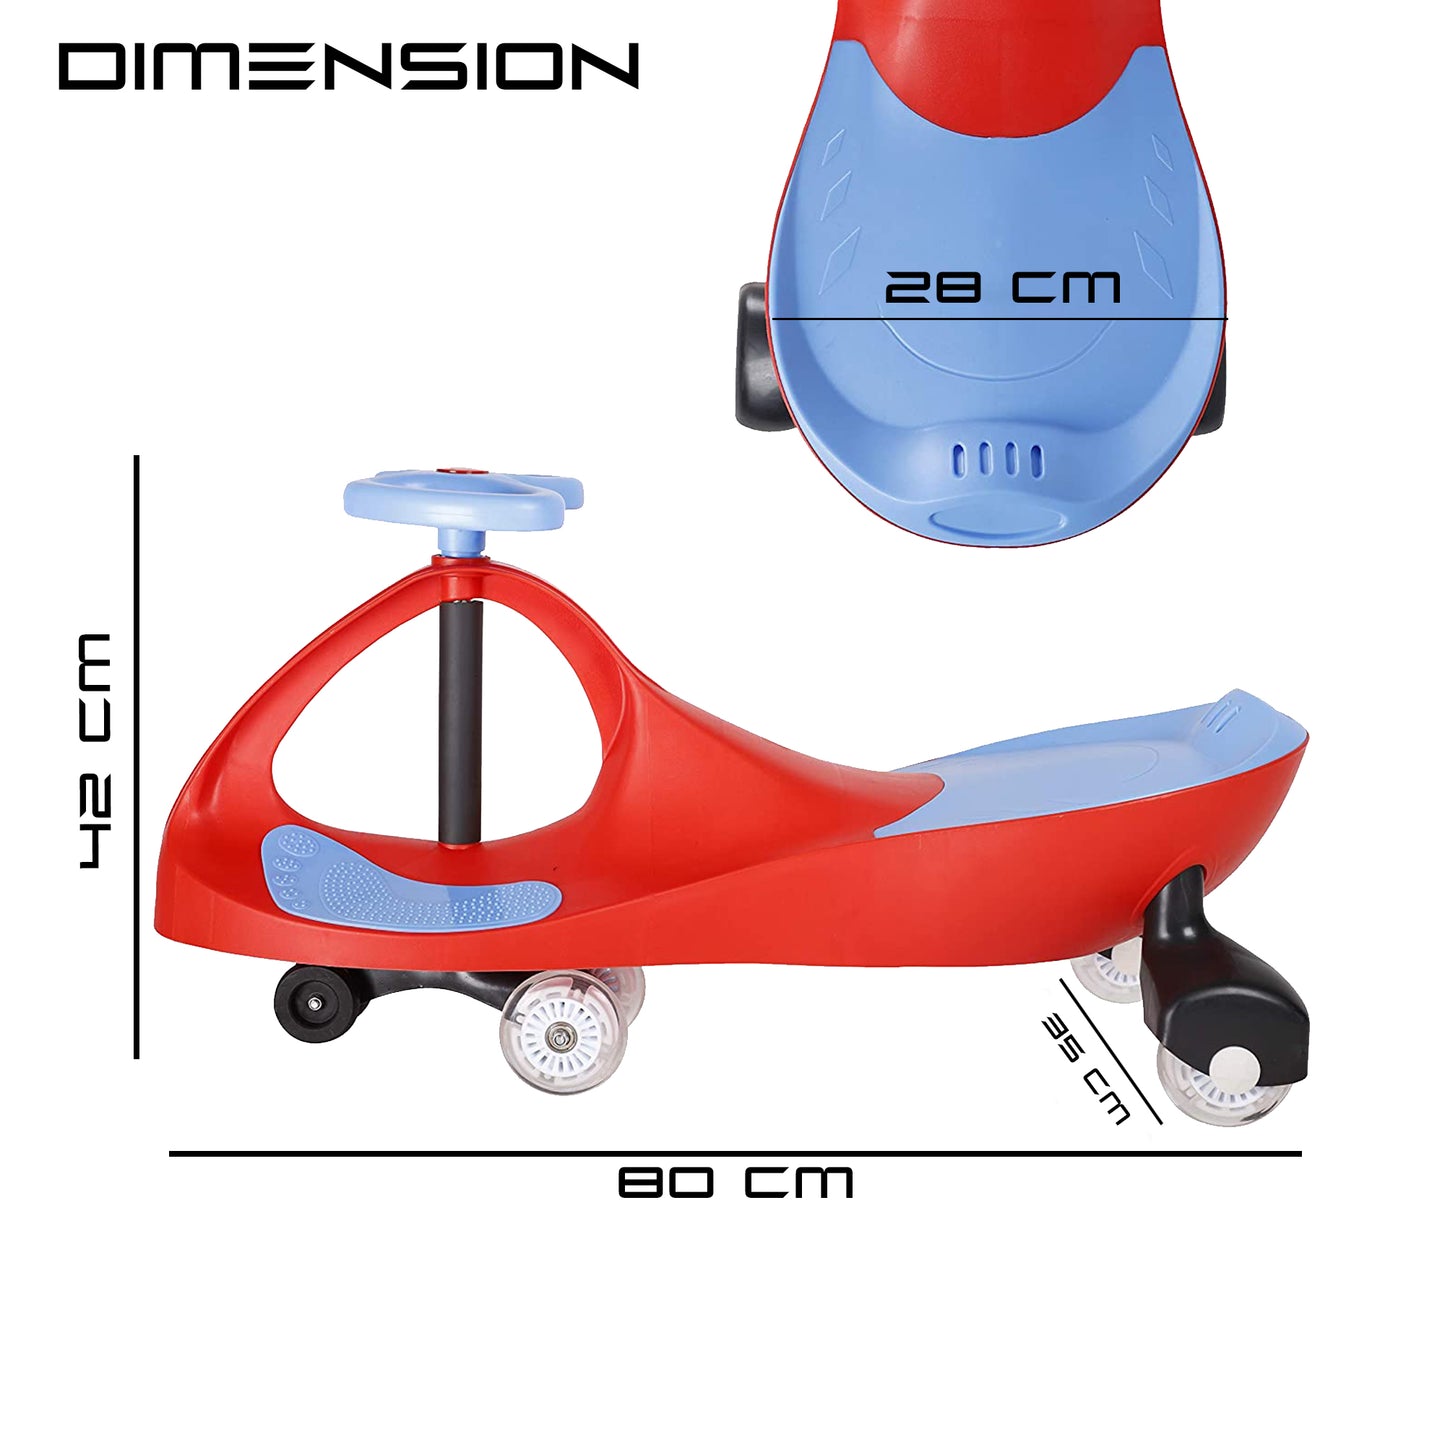 Tygatec Eco Ride-On Swing Car for Kids ( Red Color )